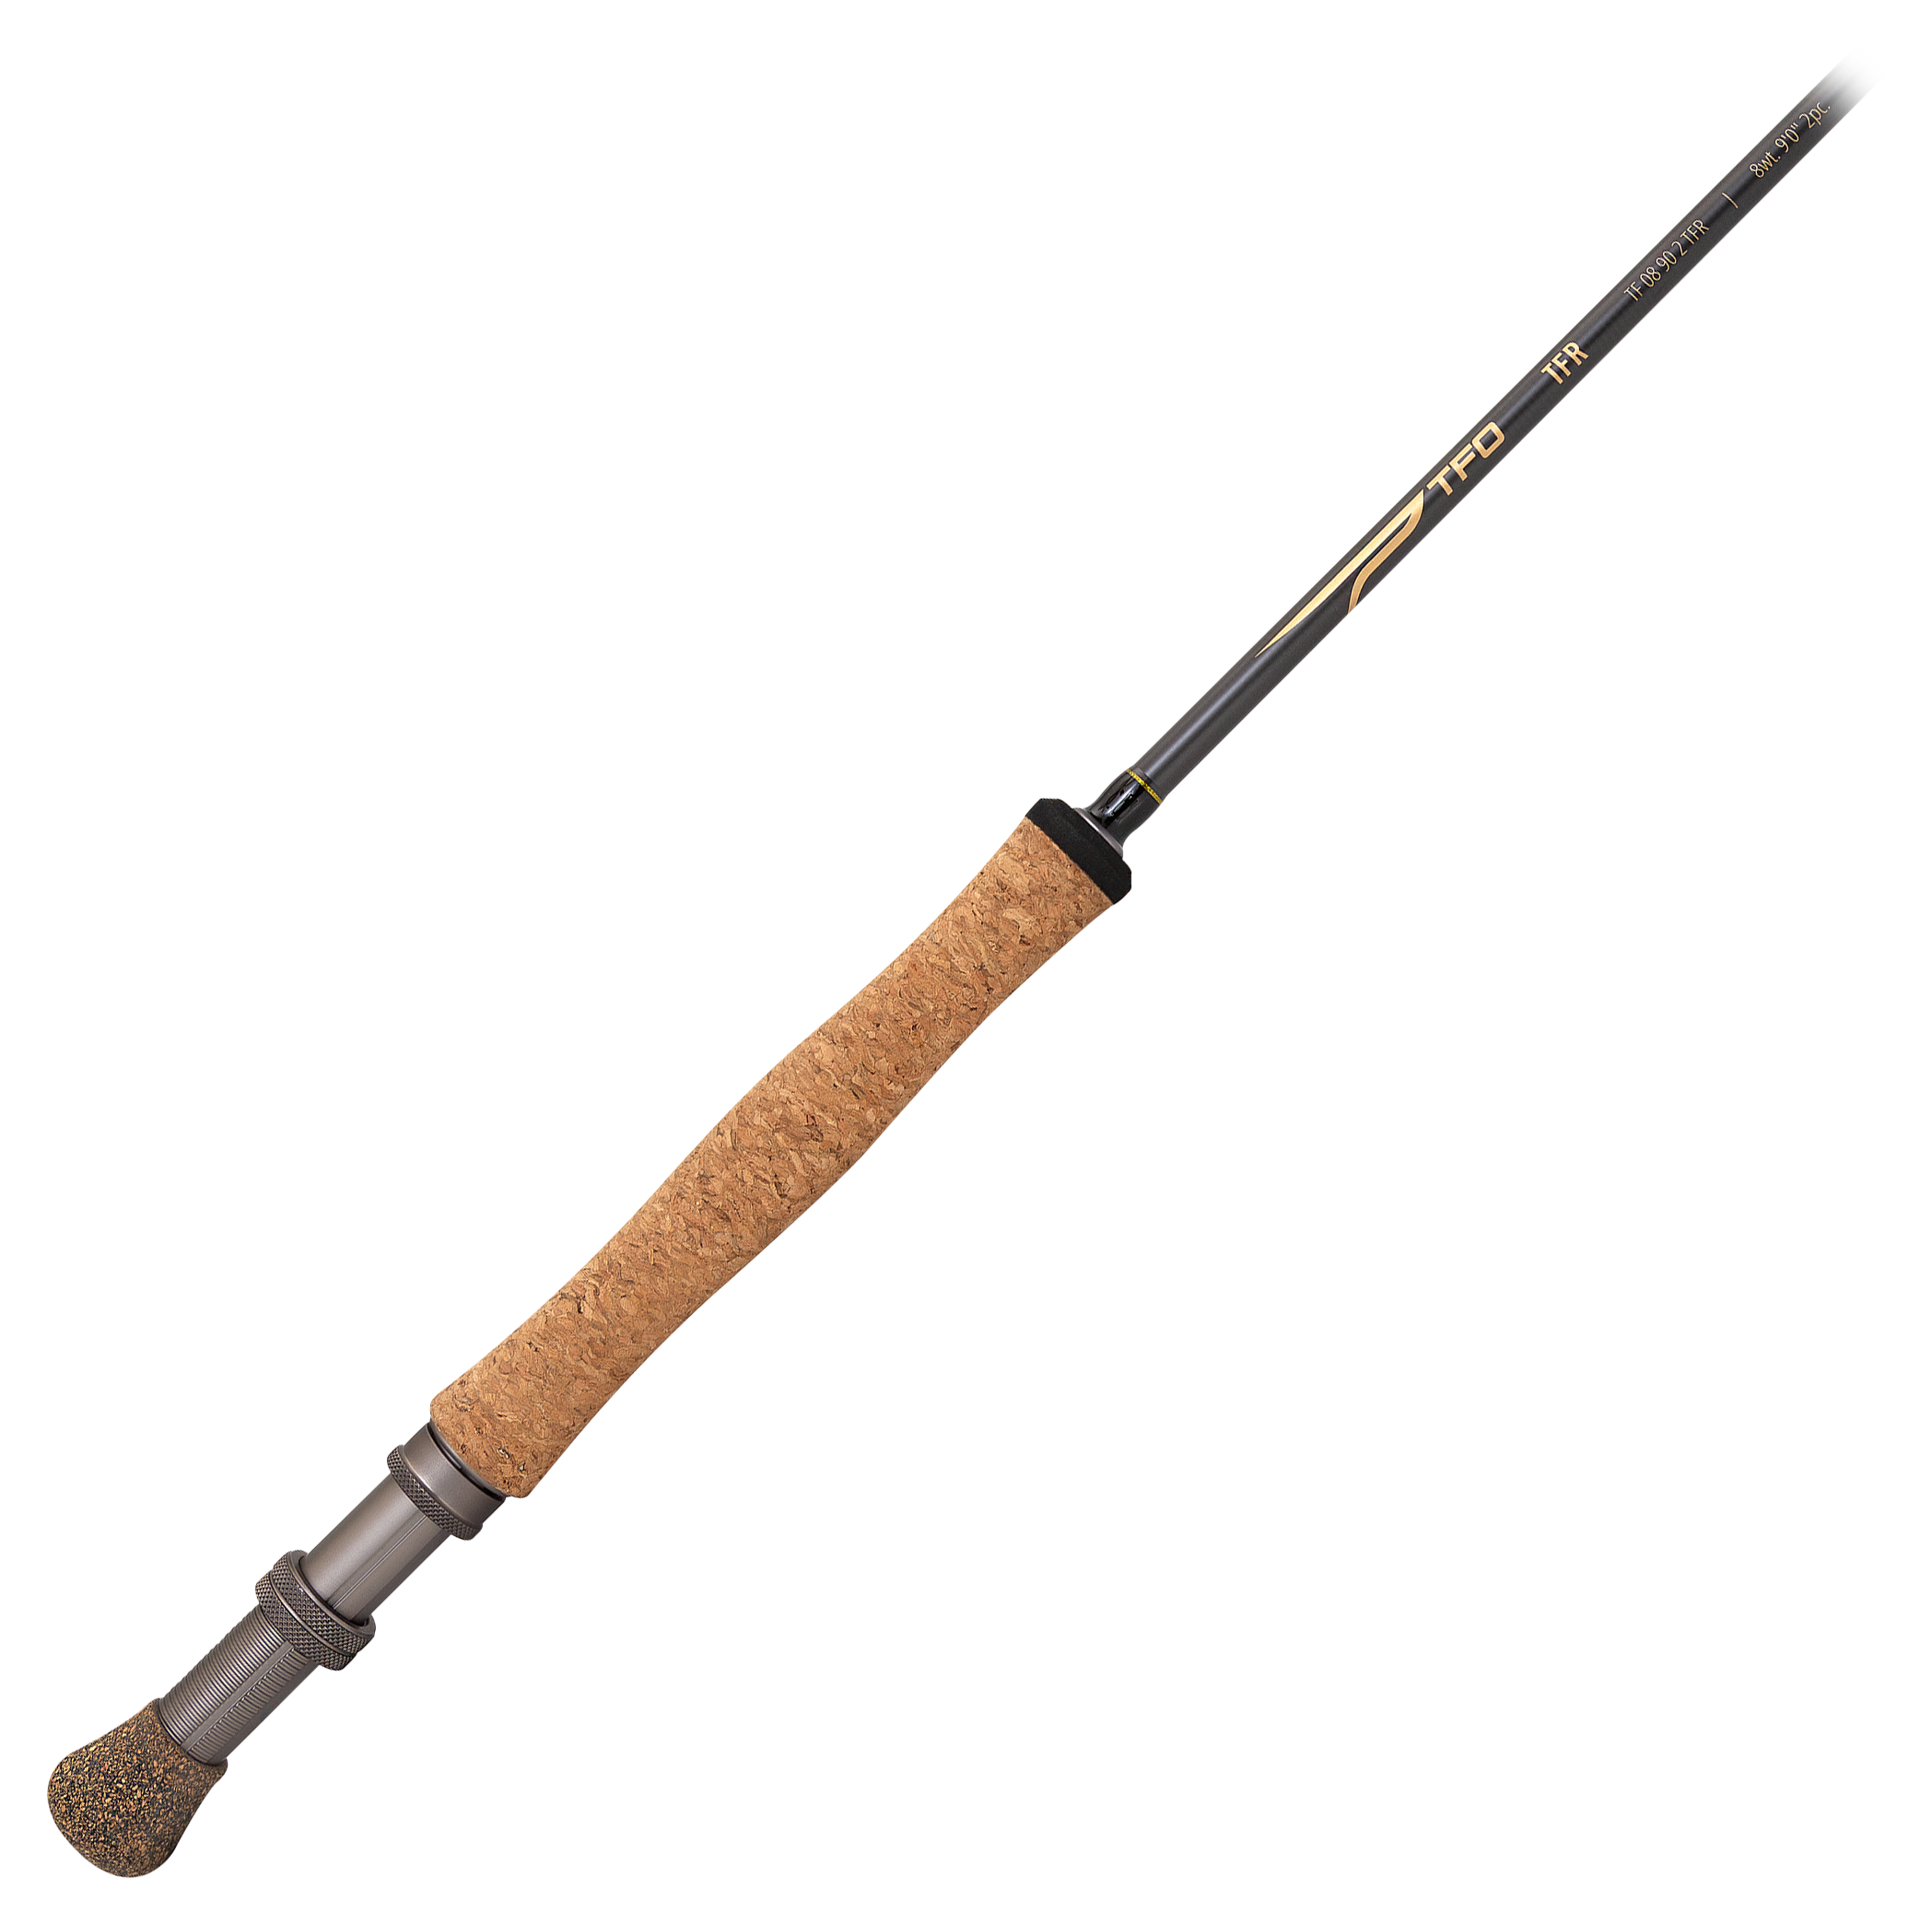 Temple Fork TFR Tough Fly Rod